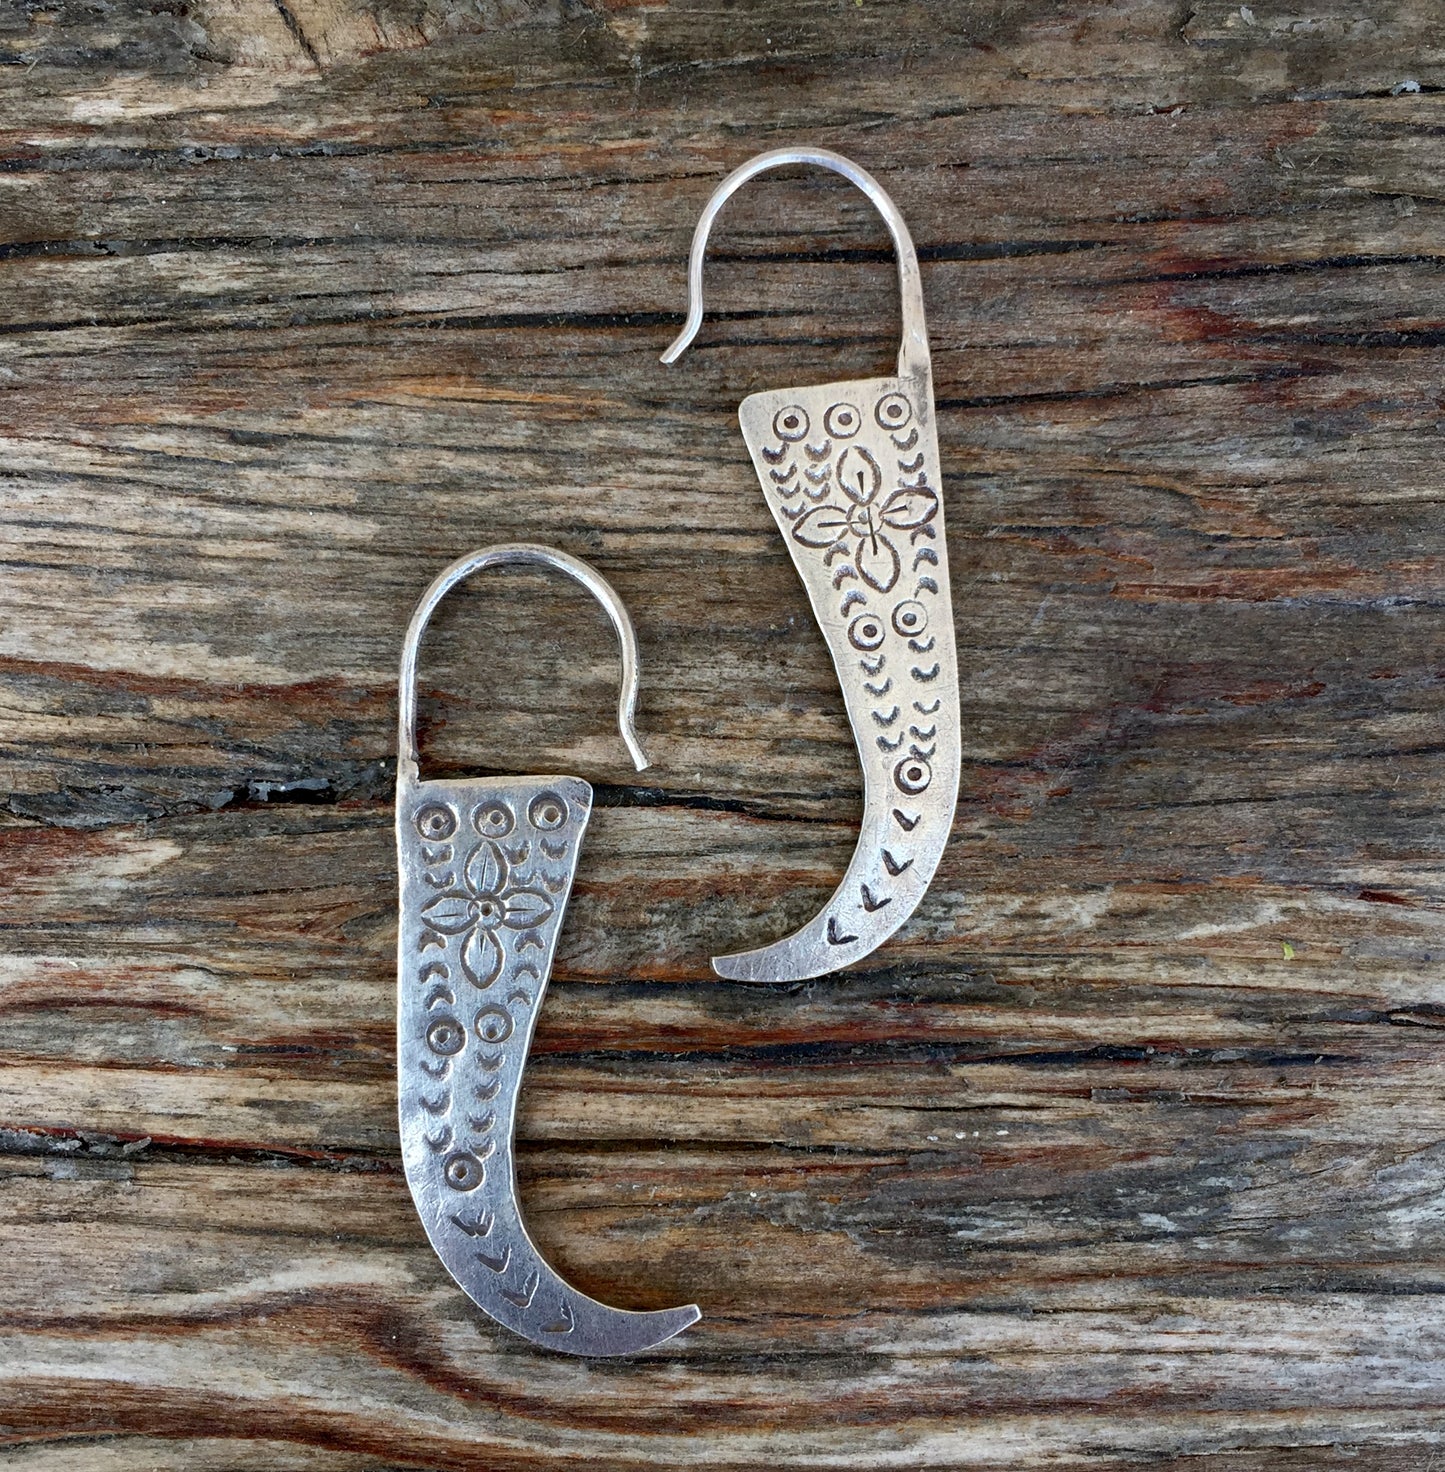 Etched Silver Earrings